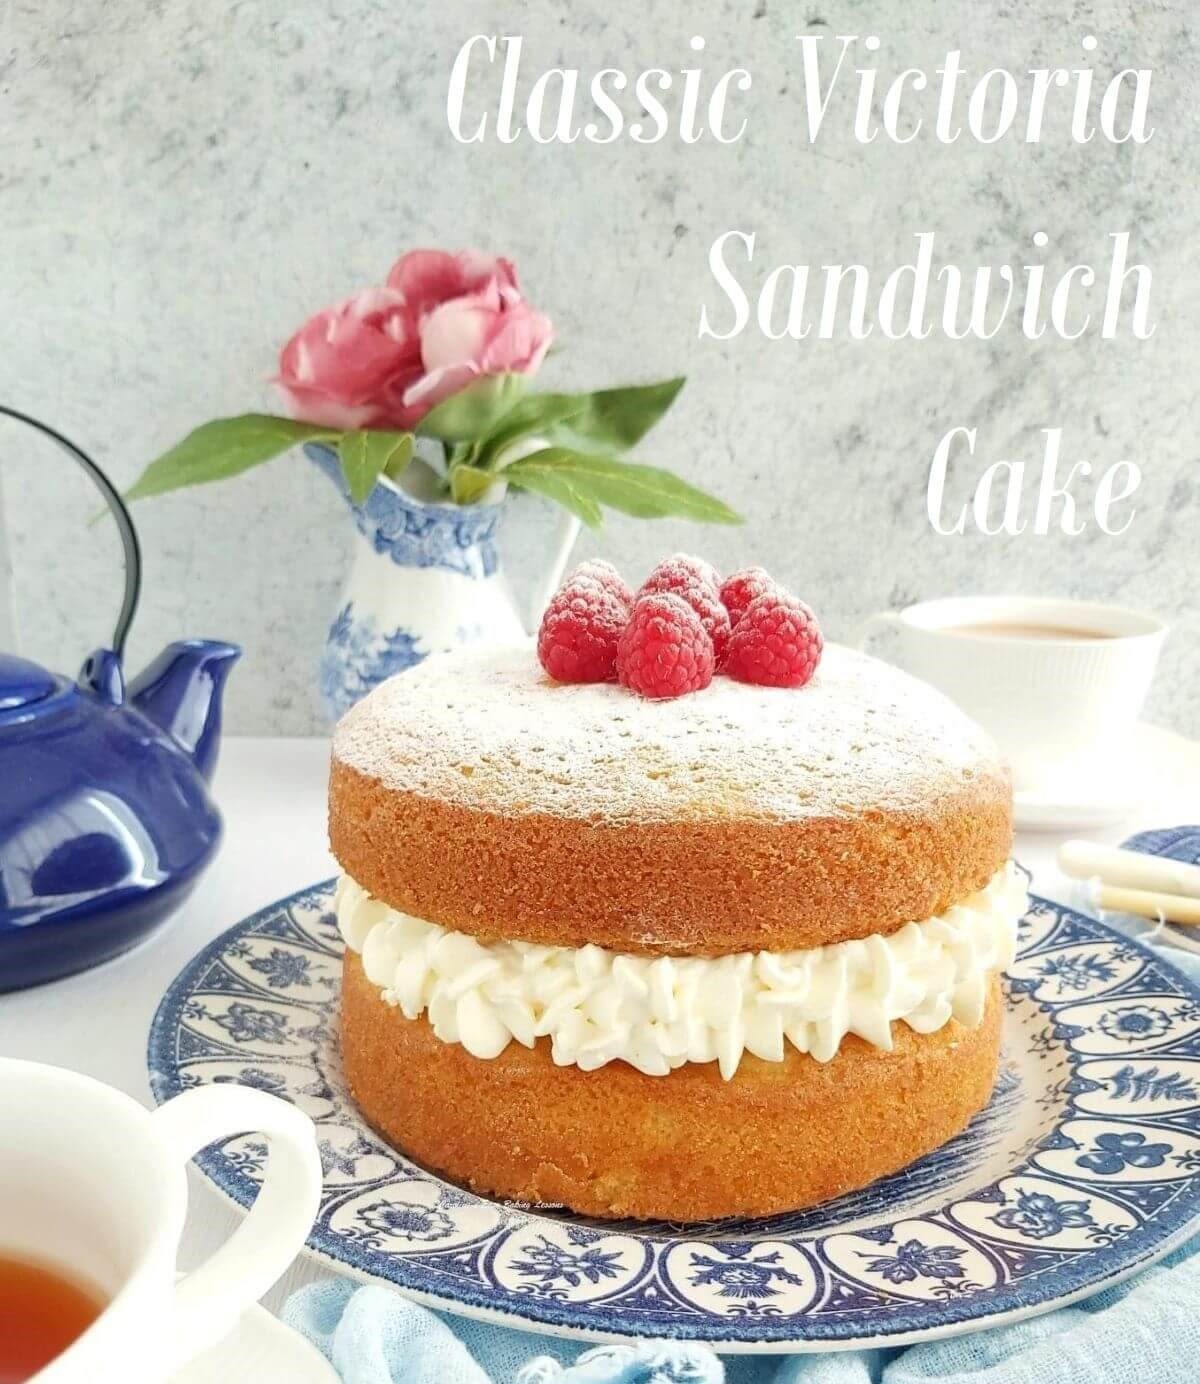 Victoria sandwich cream filled layer cake on blue plate and text croped.